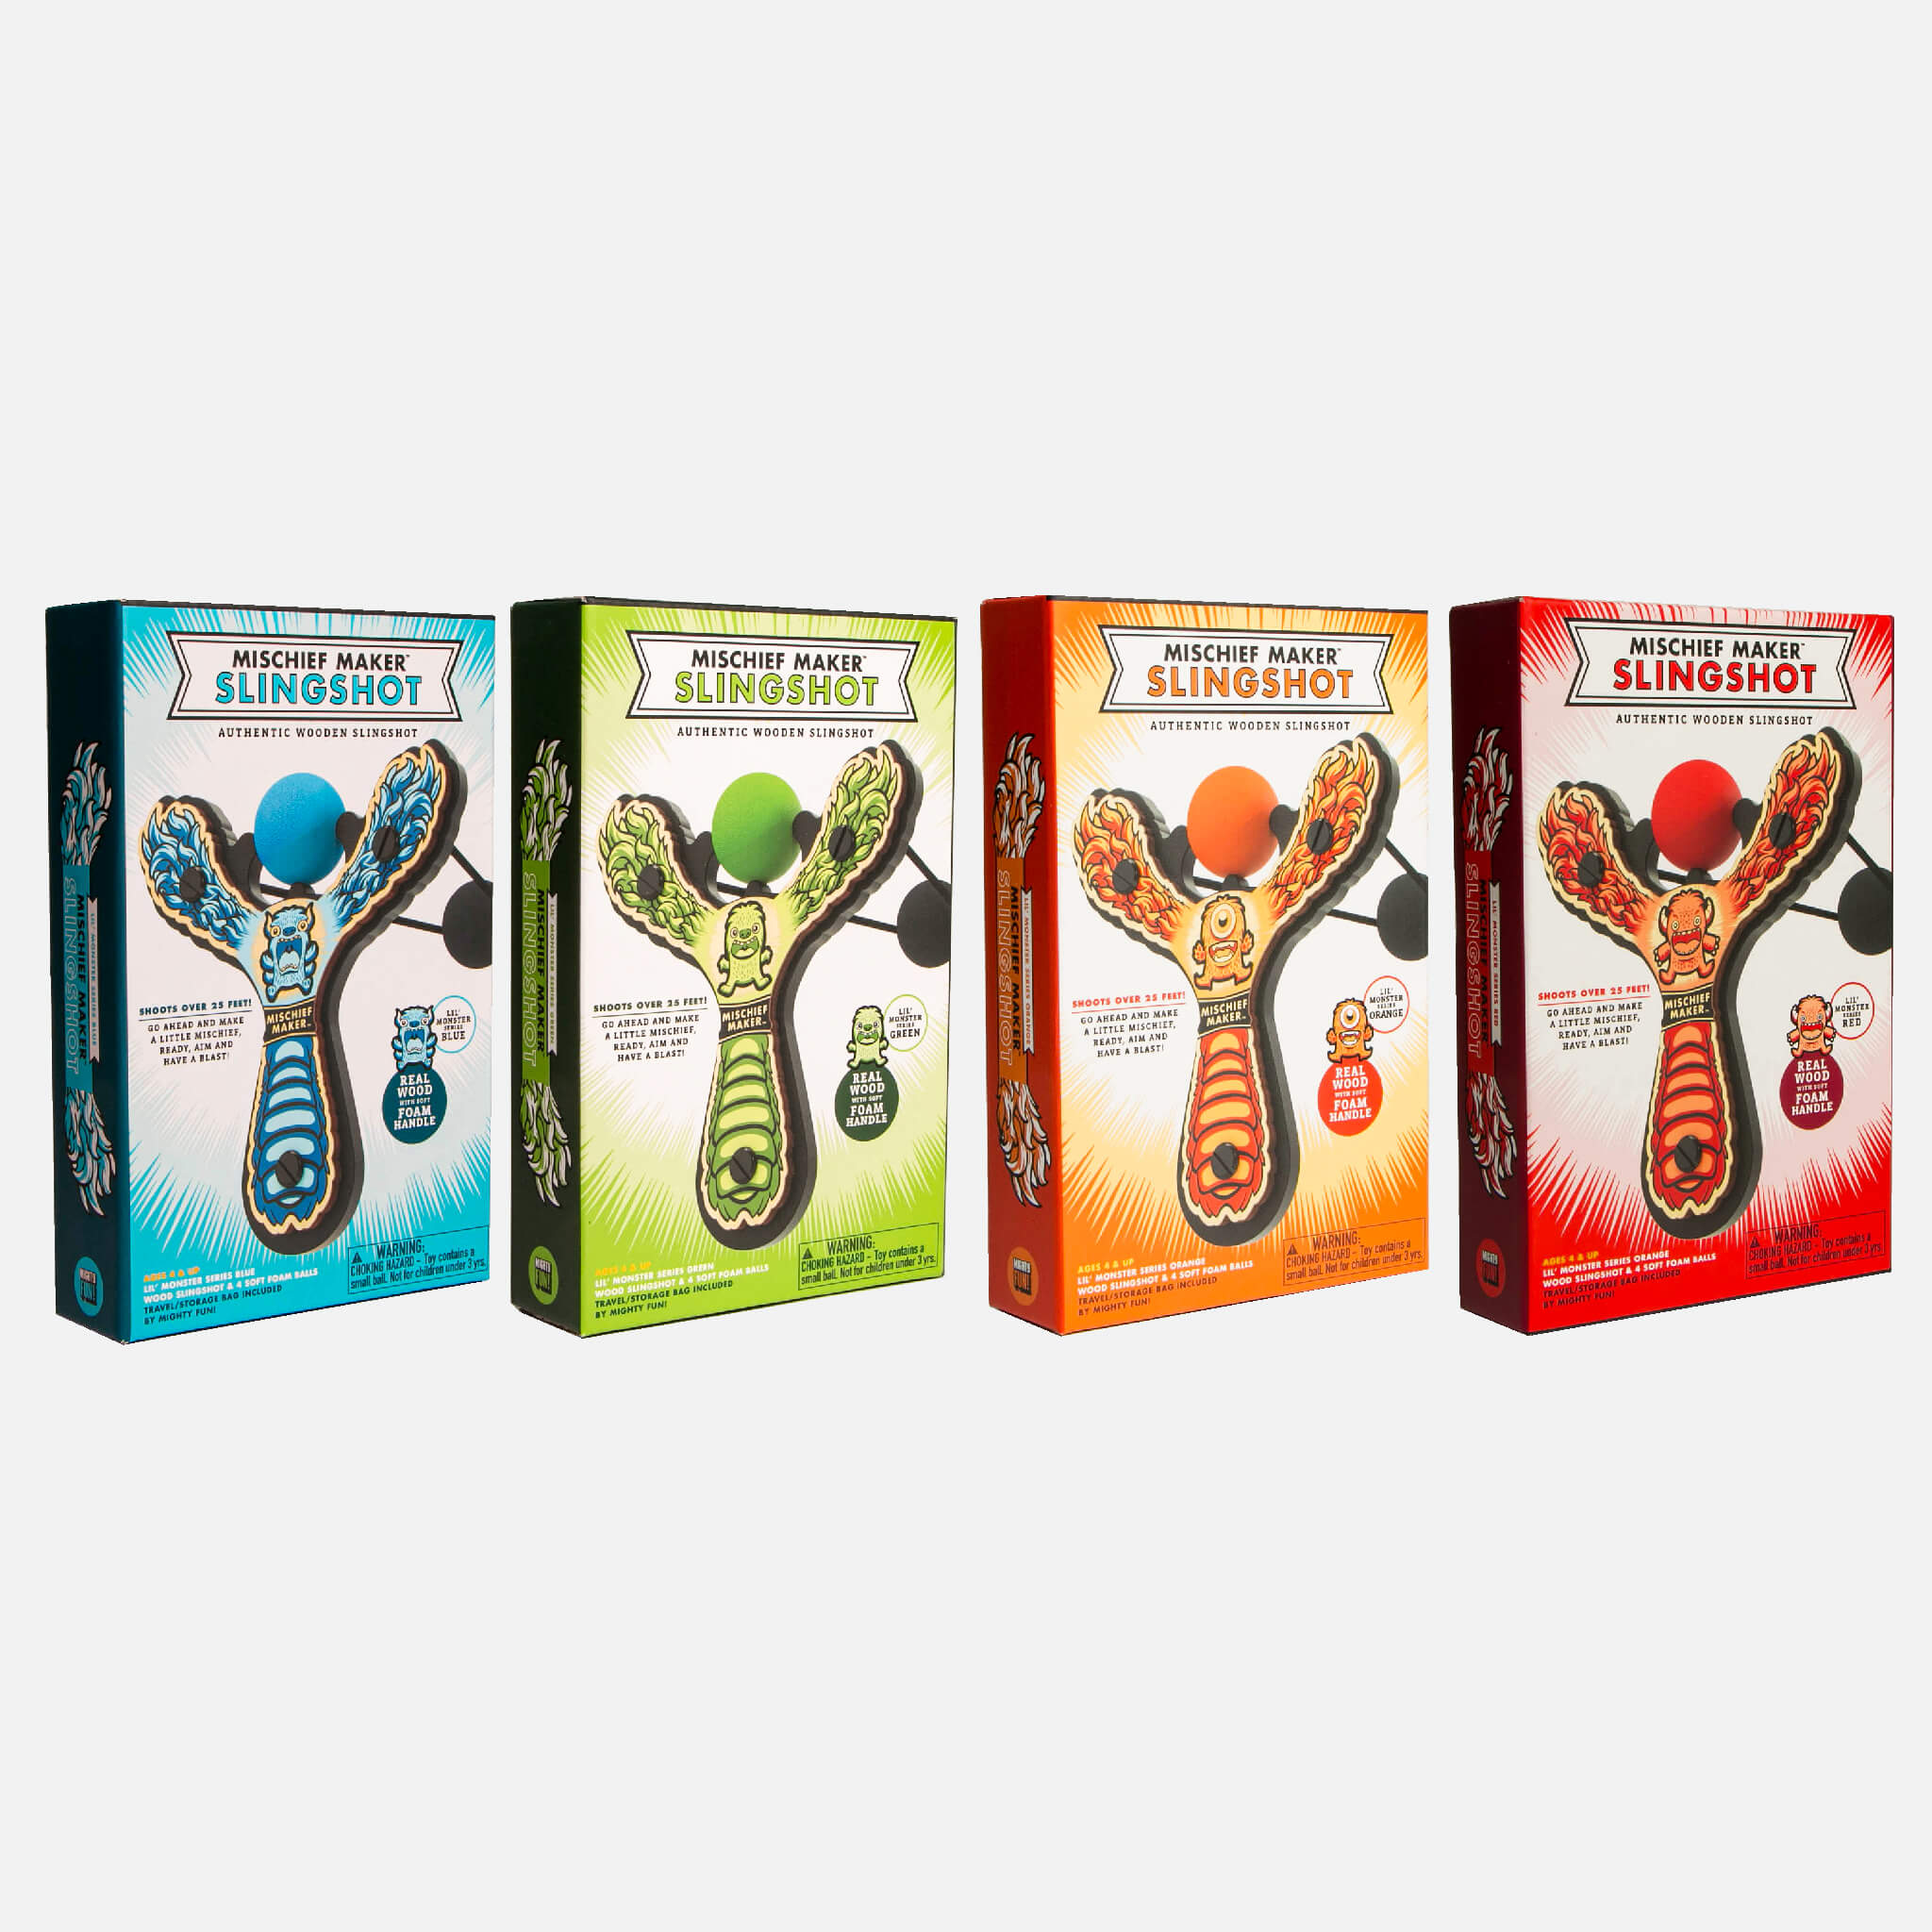 Monster toy slingshot color gift boxes including blue, green, orange, and red by Mighty Fun!